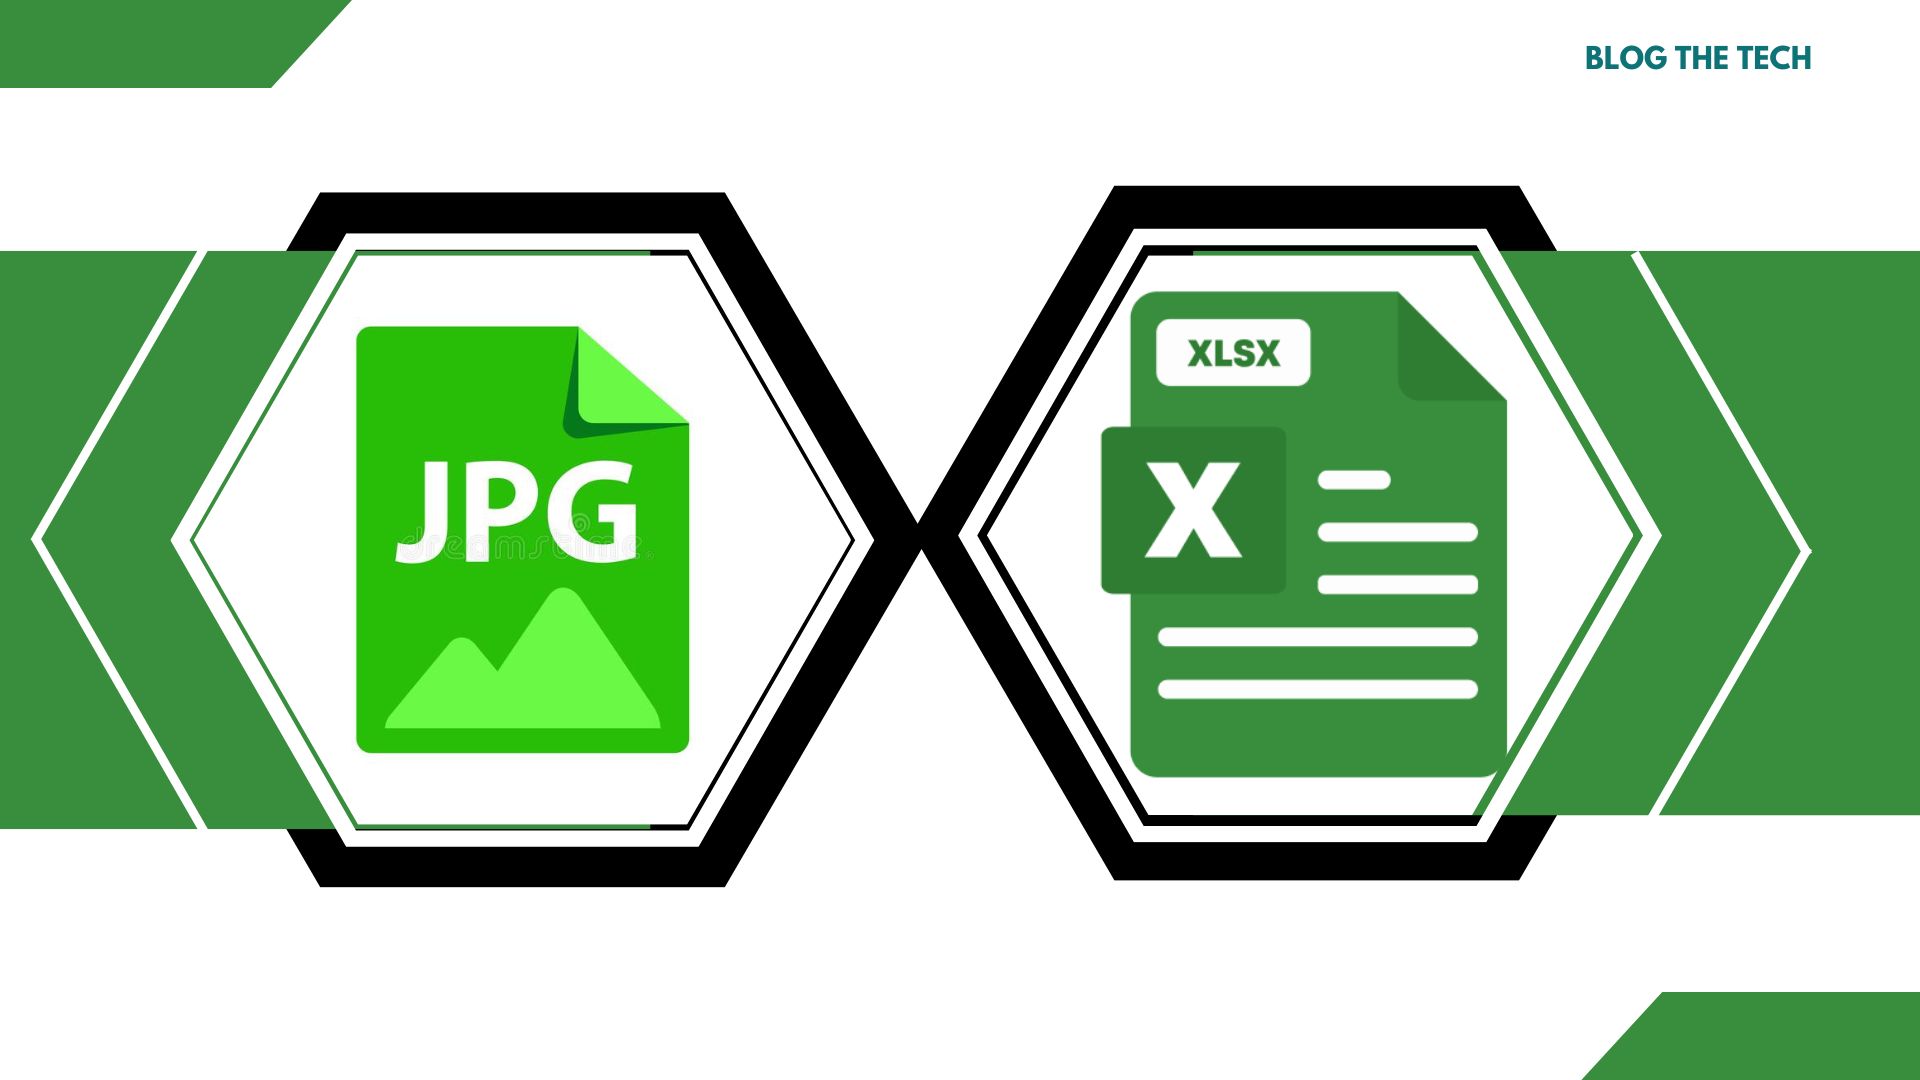 How to Convert JPG to Excel (xlsx) SpreadSheet for Free